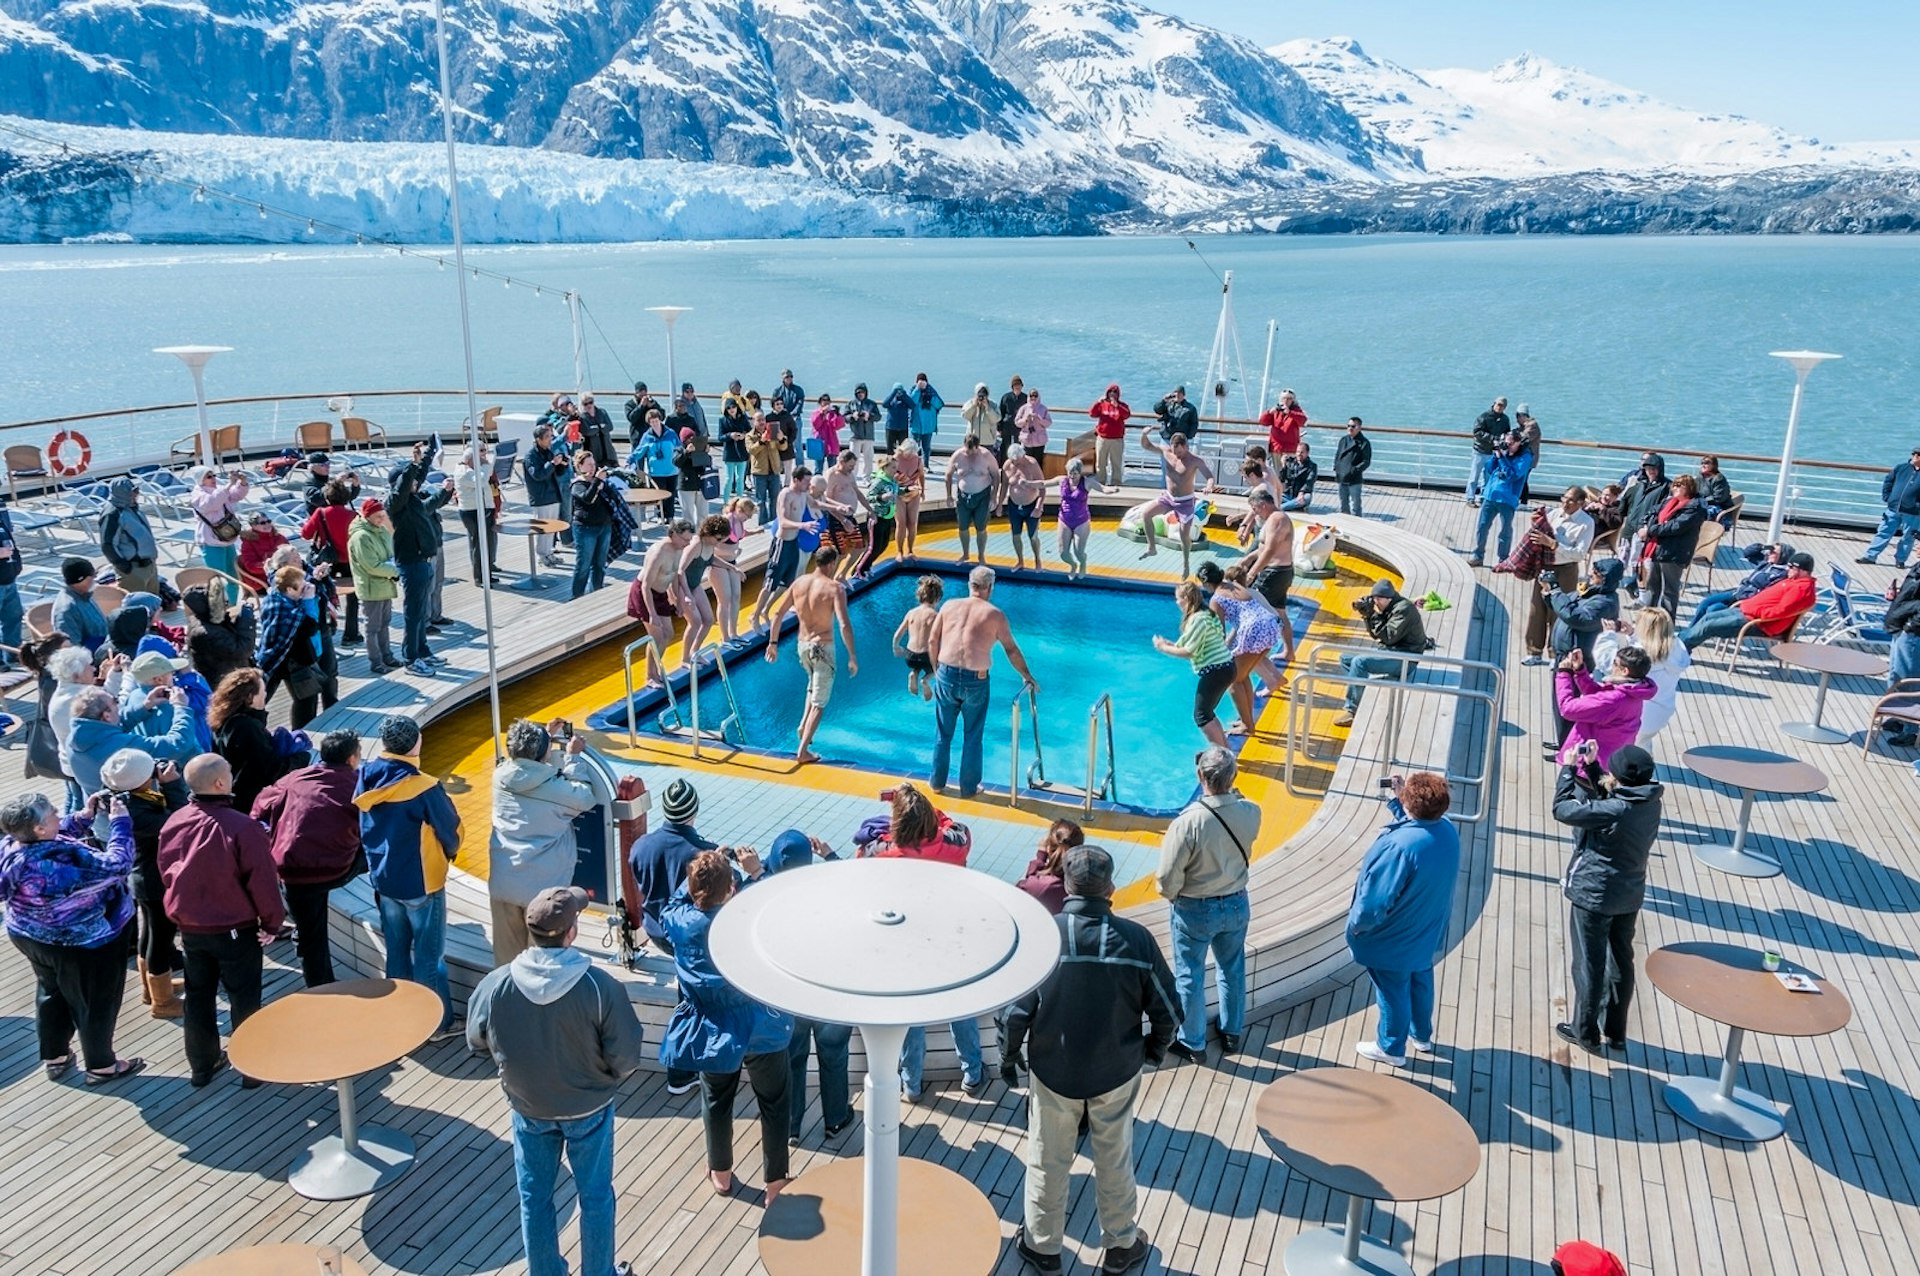 Cruise ship passengers in Glacier Bay National Park take the Polar Bear Dip, into the aft deck pool.